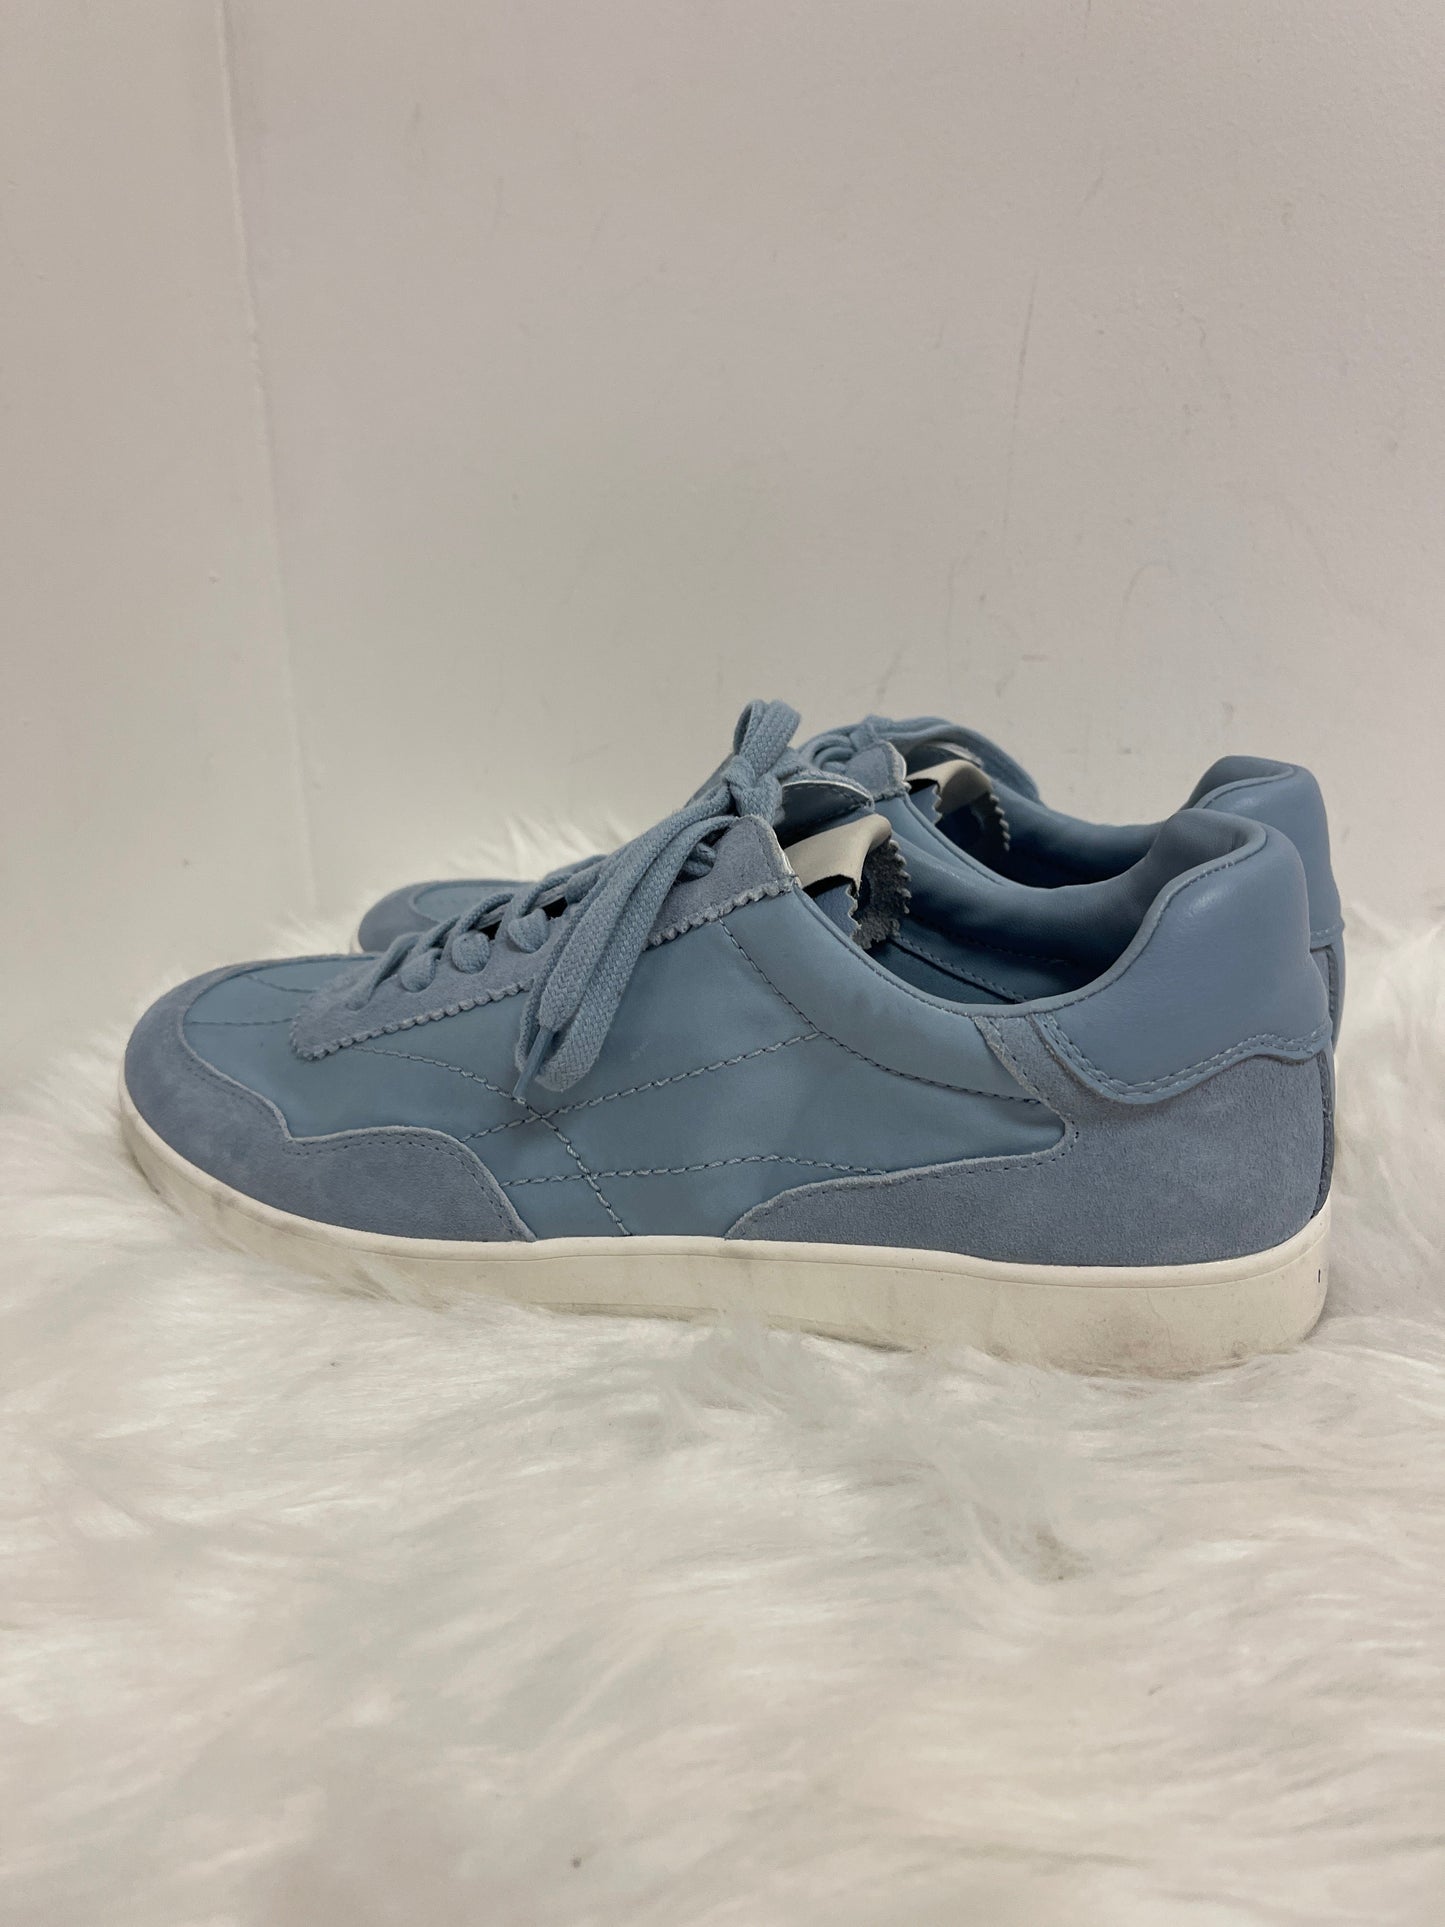 Blue Shoes Sneakers Steve Madden, Size 11